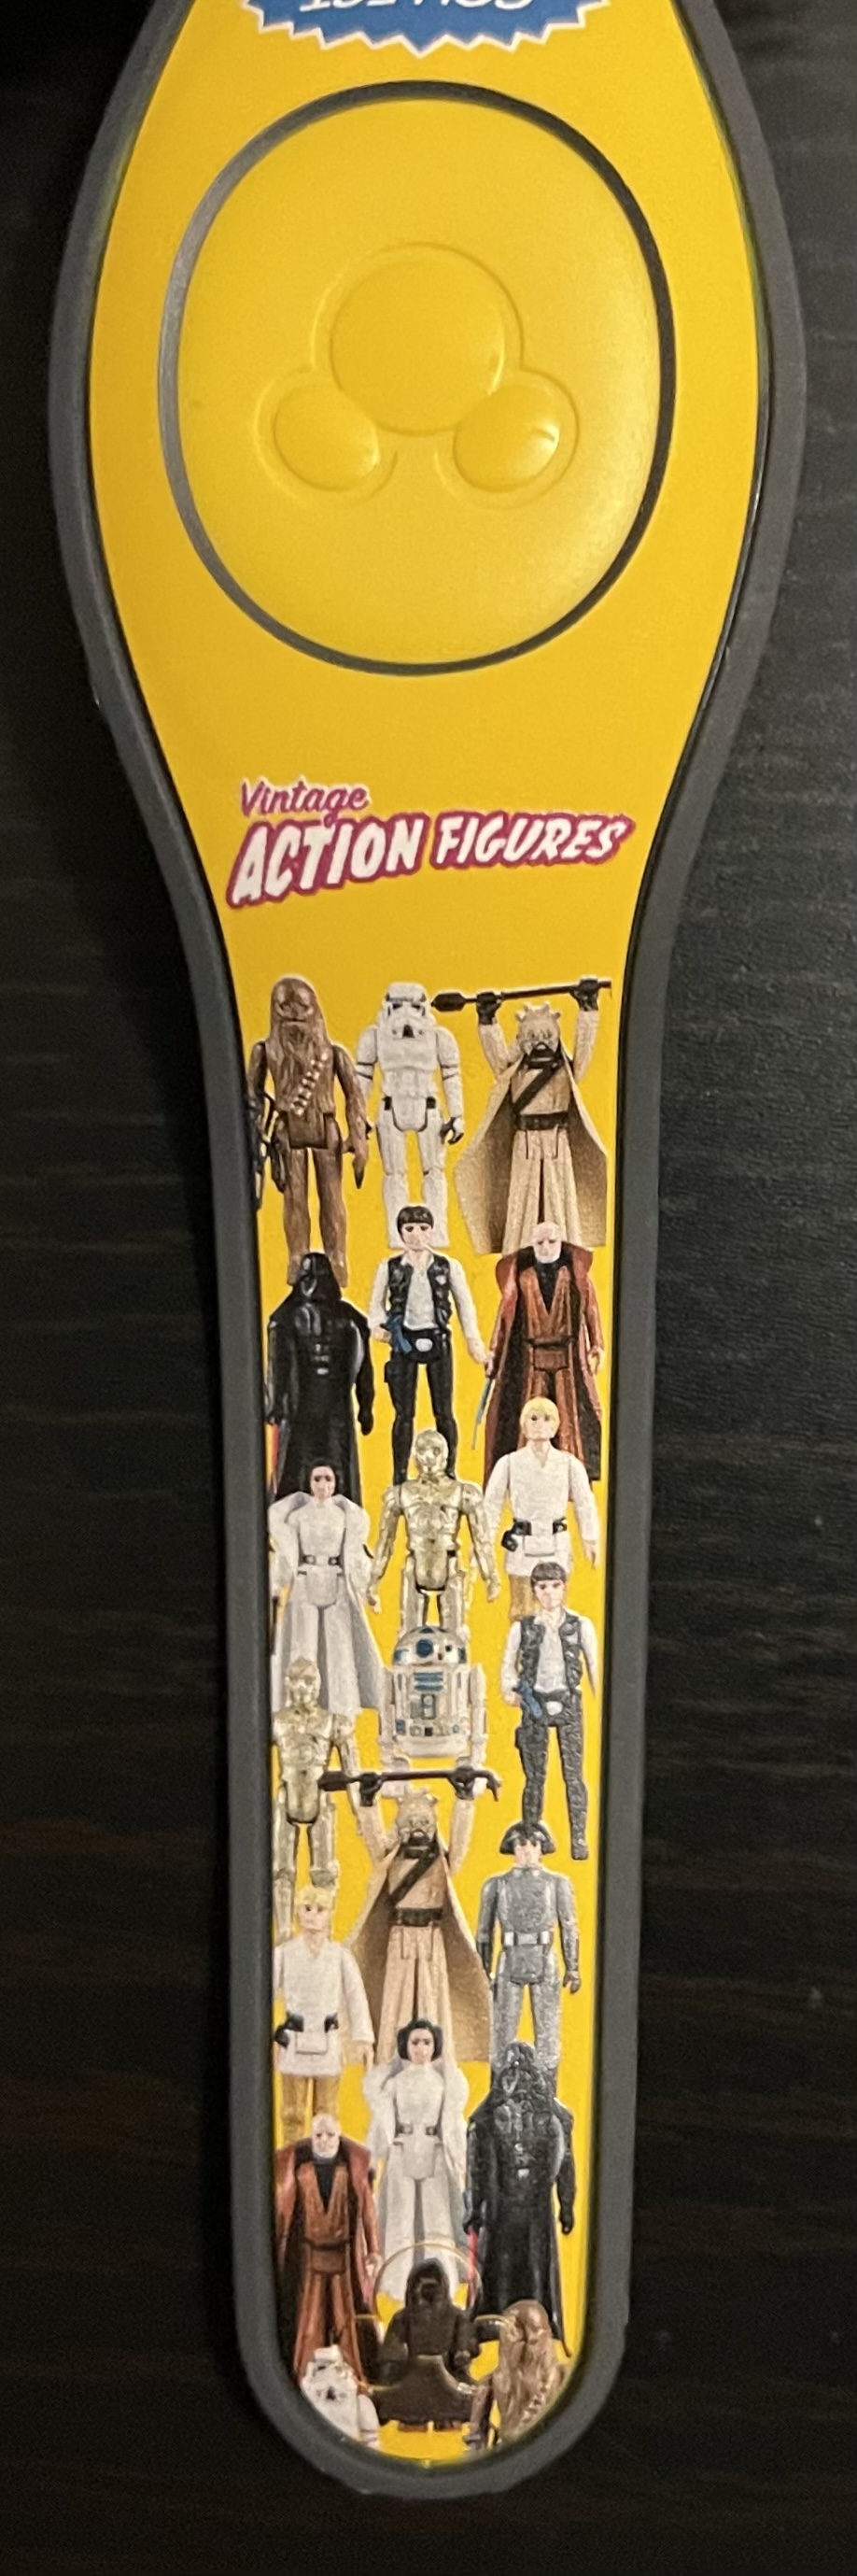 A new Star Wars Vintage Action Figures Limited Release MagicBand was released today